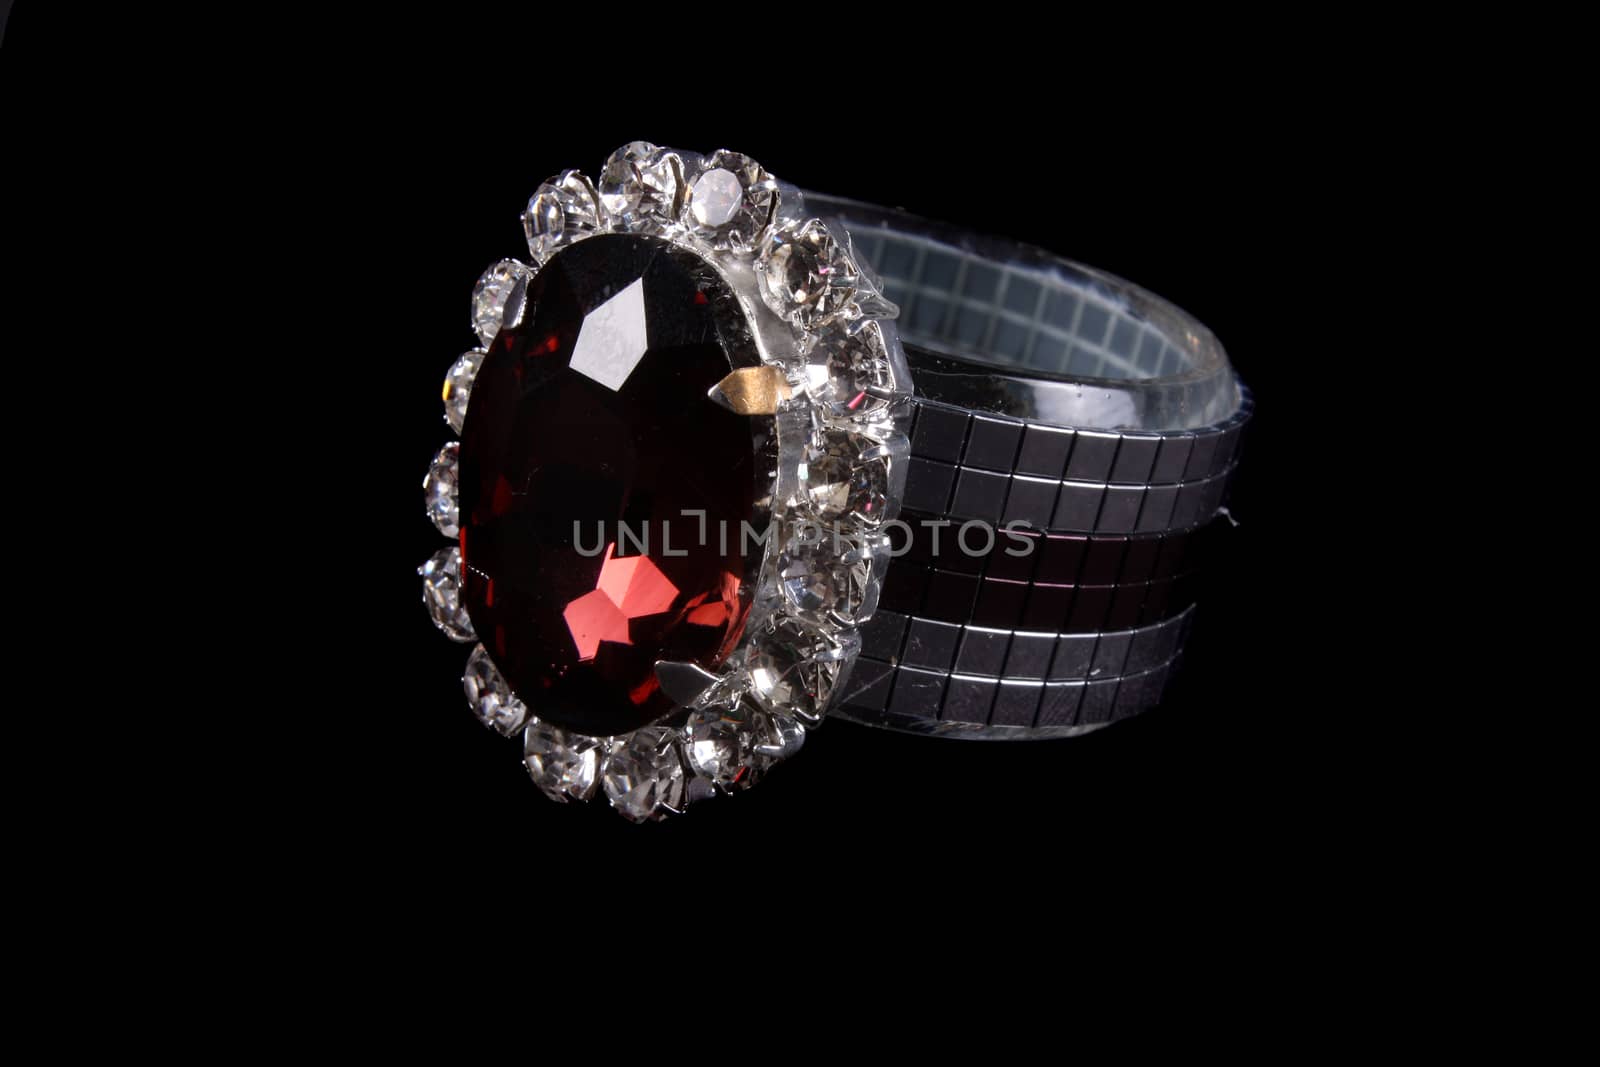 A luxurious tissue holder made of silver and studded with a red gemstone